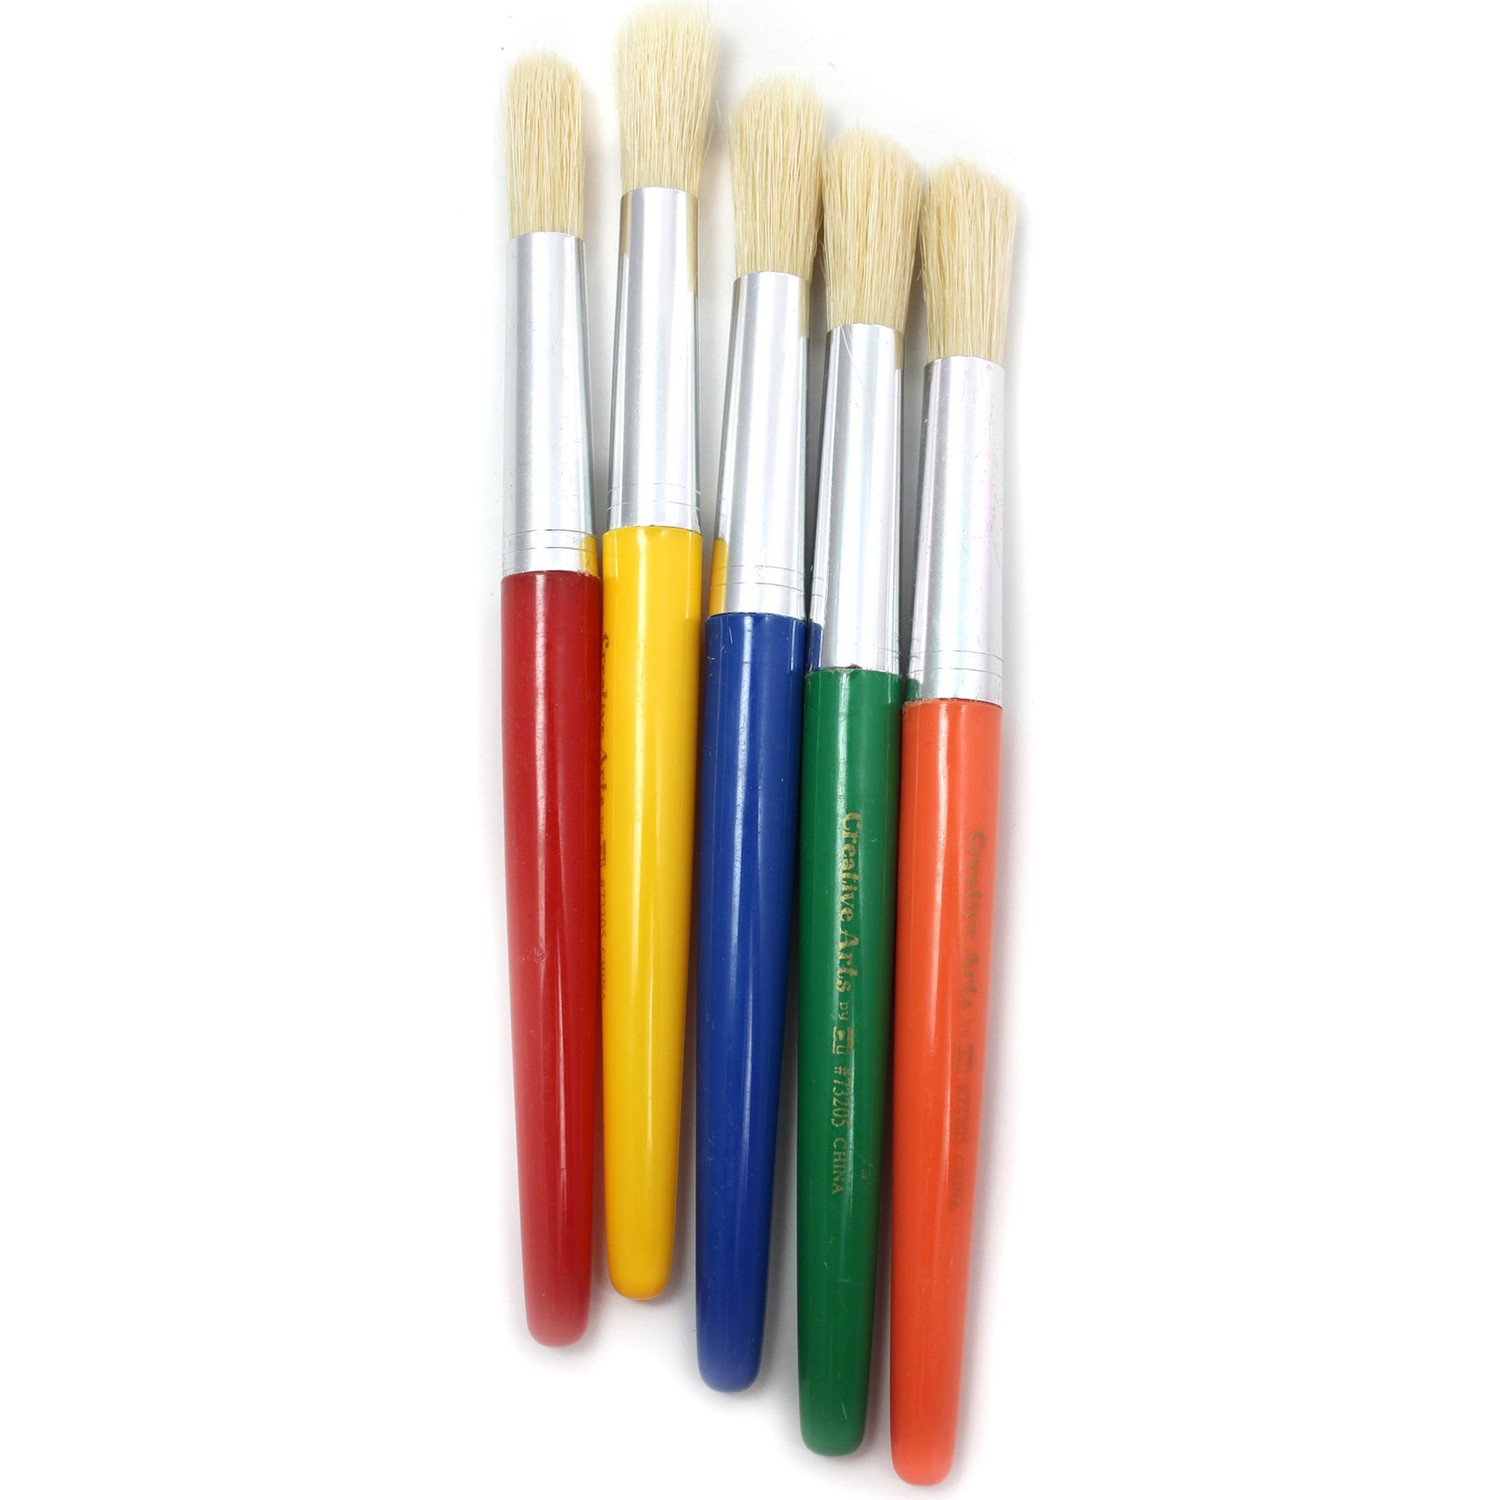 Stubby Round Brushes, Natural Bristles, Assorted Colors, Set of 5